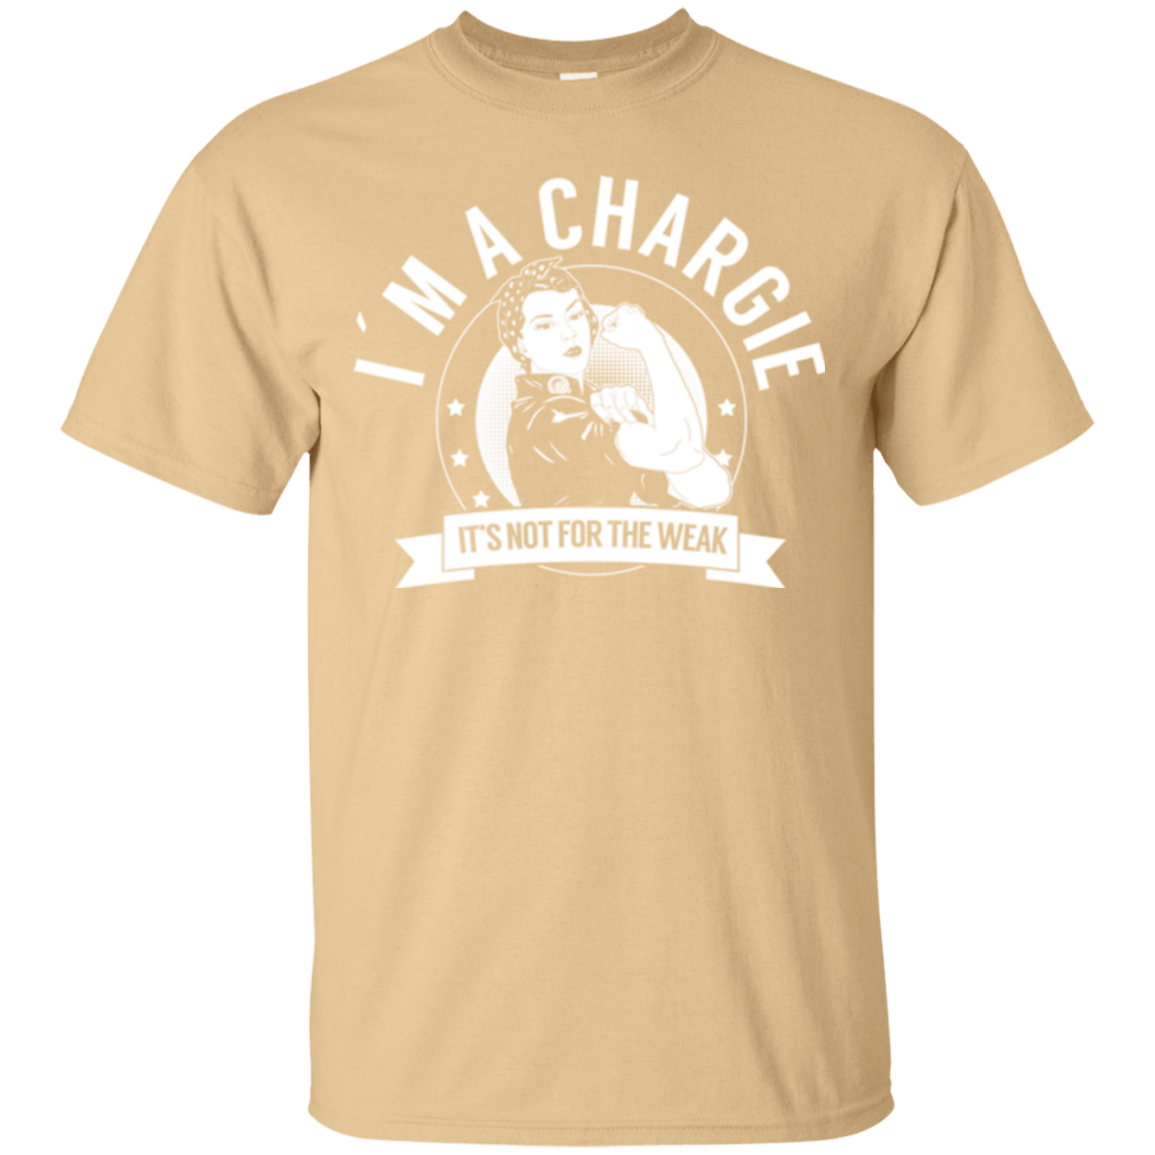 Chargie Not For The Weak Unisex Shirt - The Unchargeables